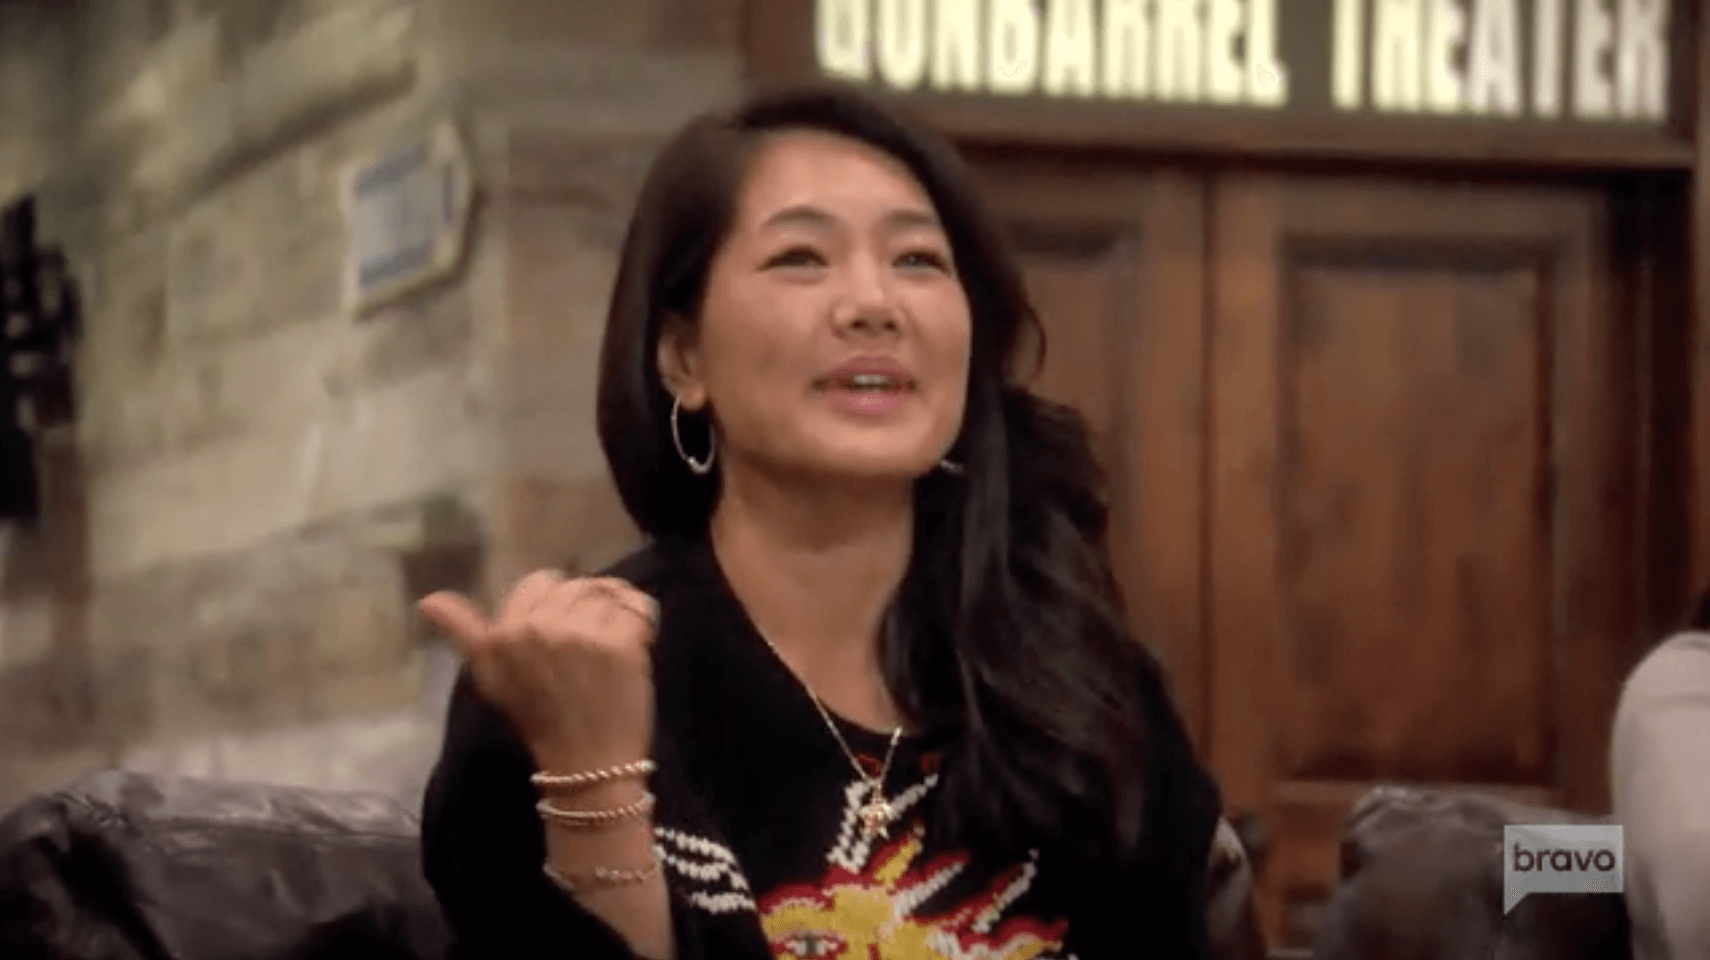 ‘RHOBH’ RECAP: Crystal Kung Minkoff GOES OFF On Sutton During Racism Discussion!